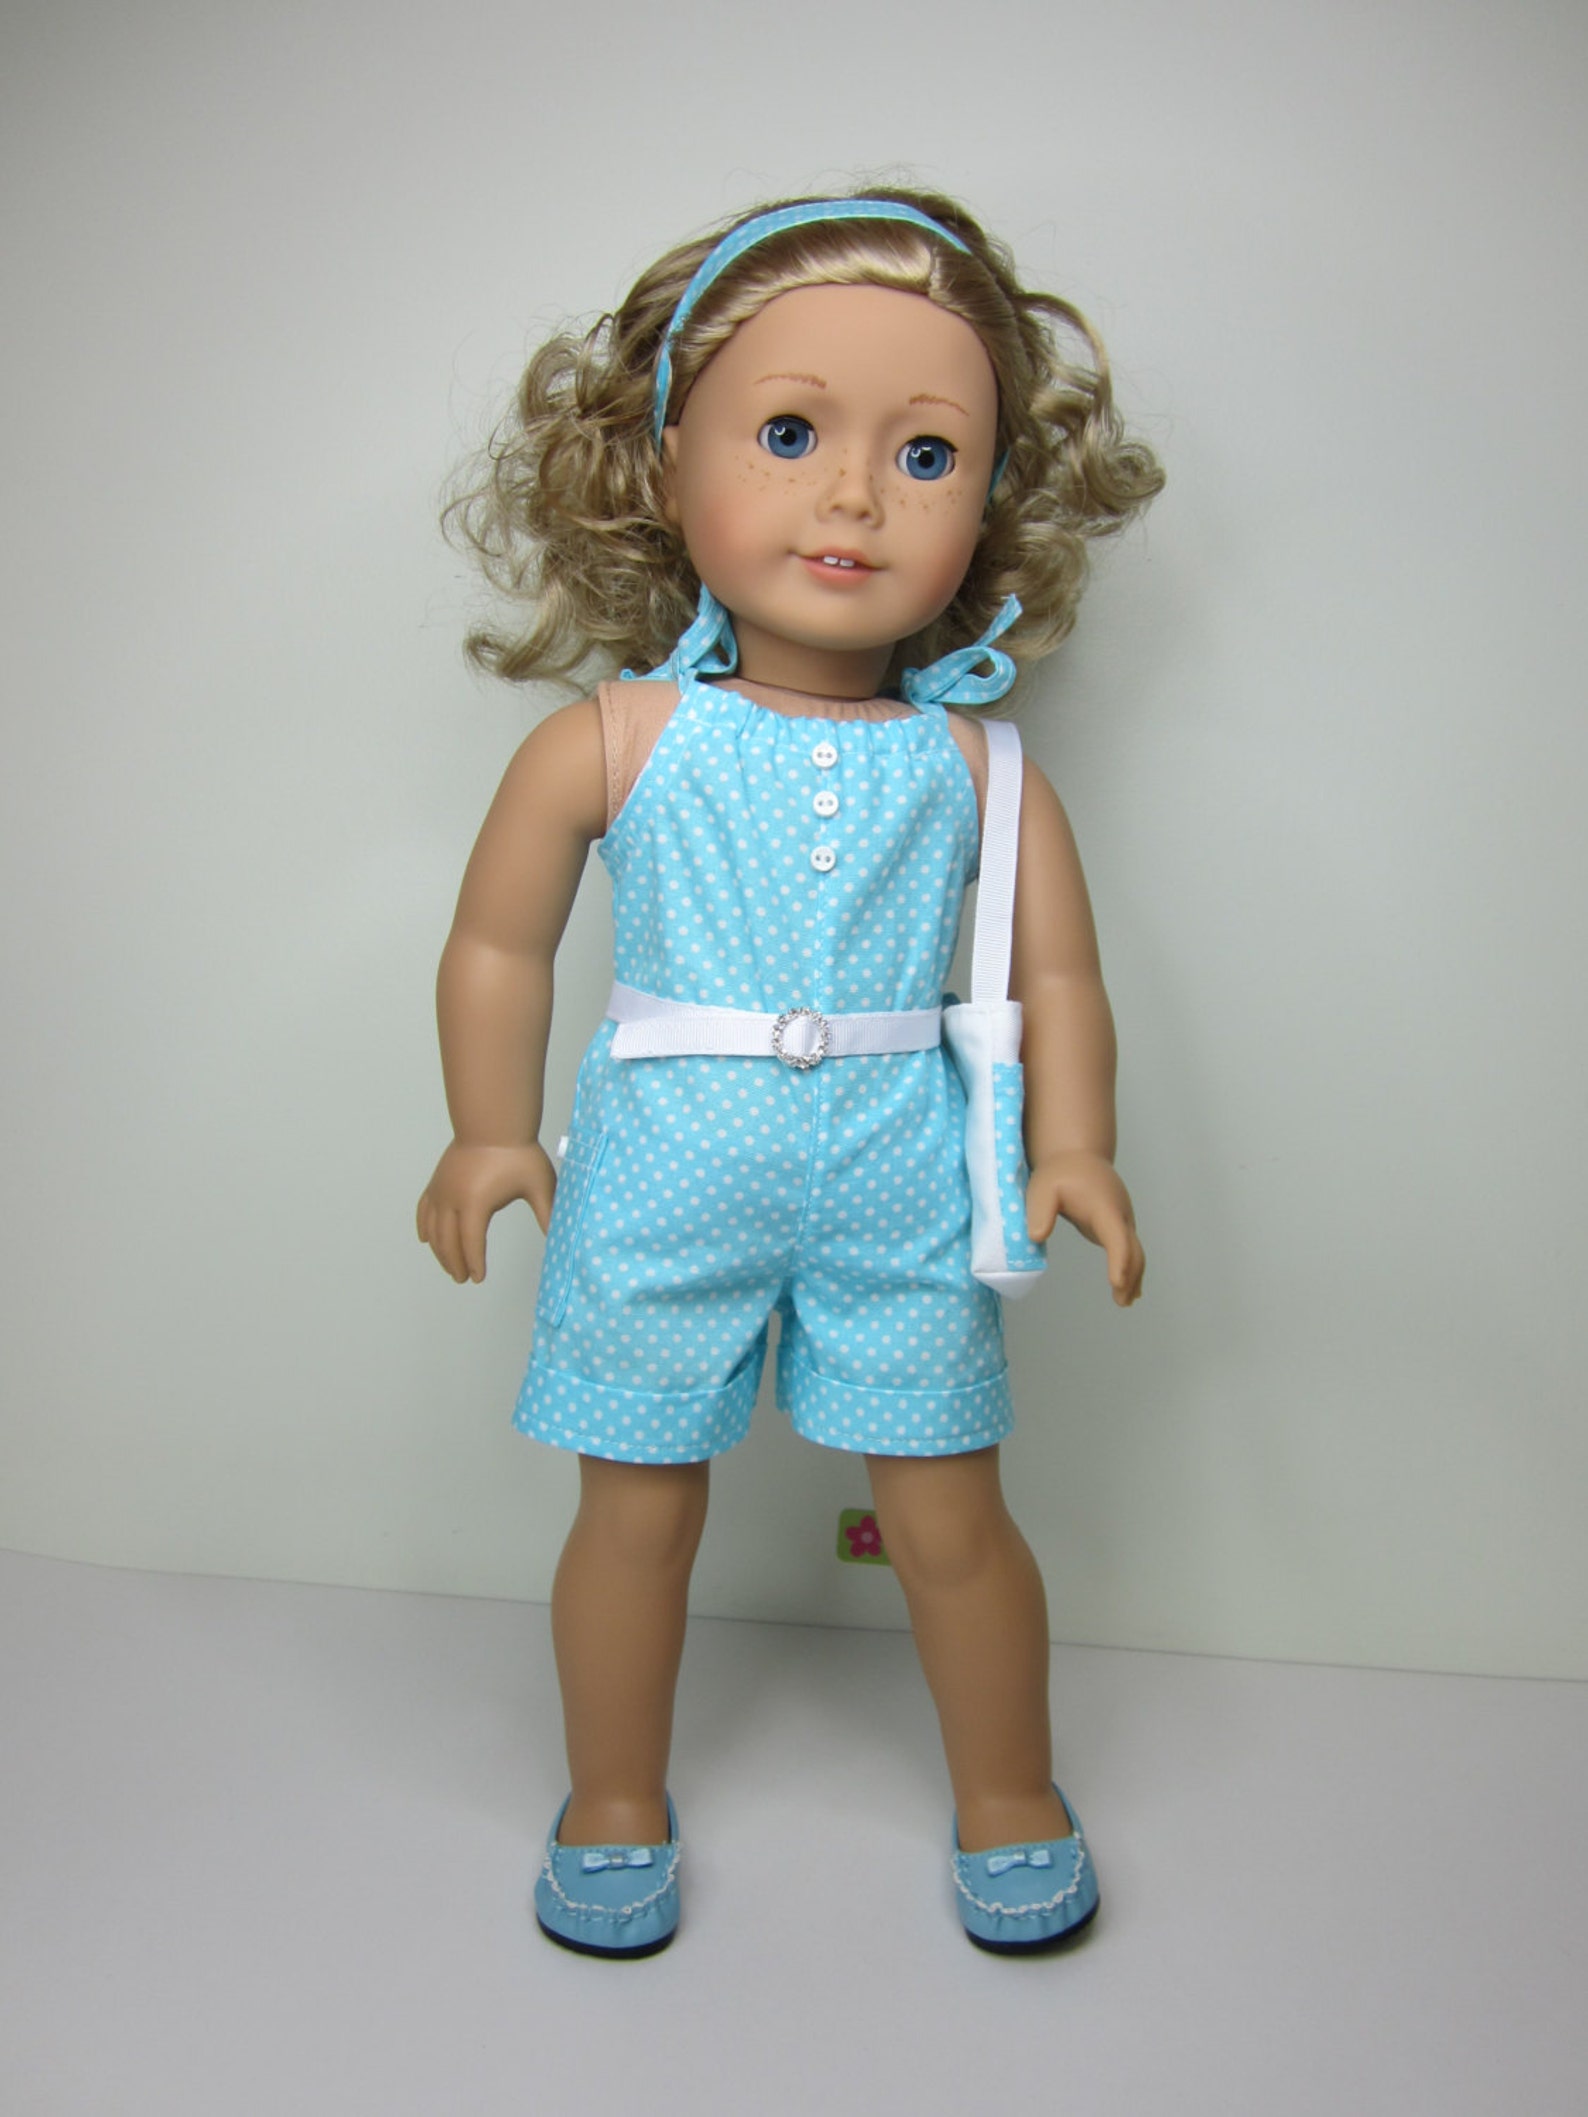 American girl doll clothes 4pc Super cute aqua with white | Etsy